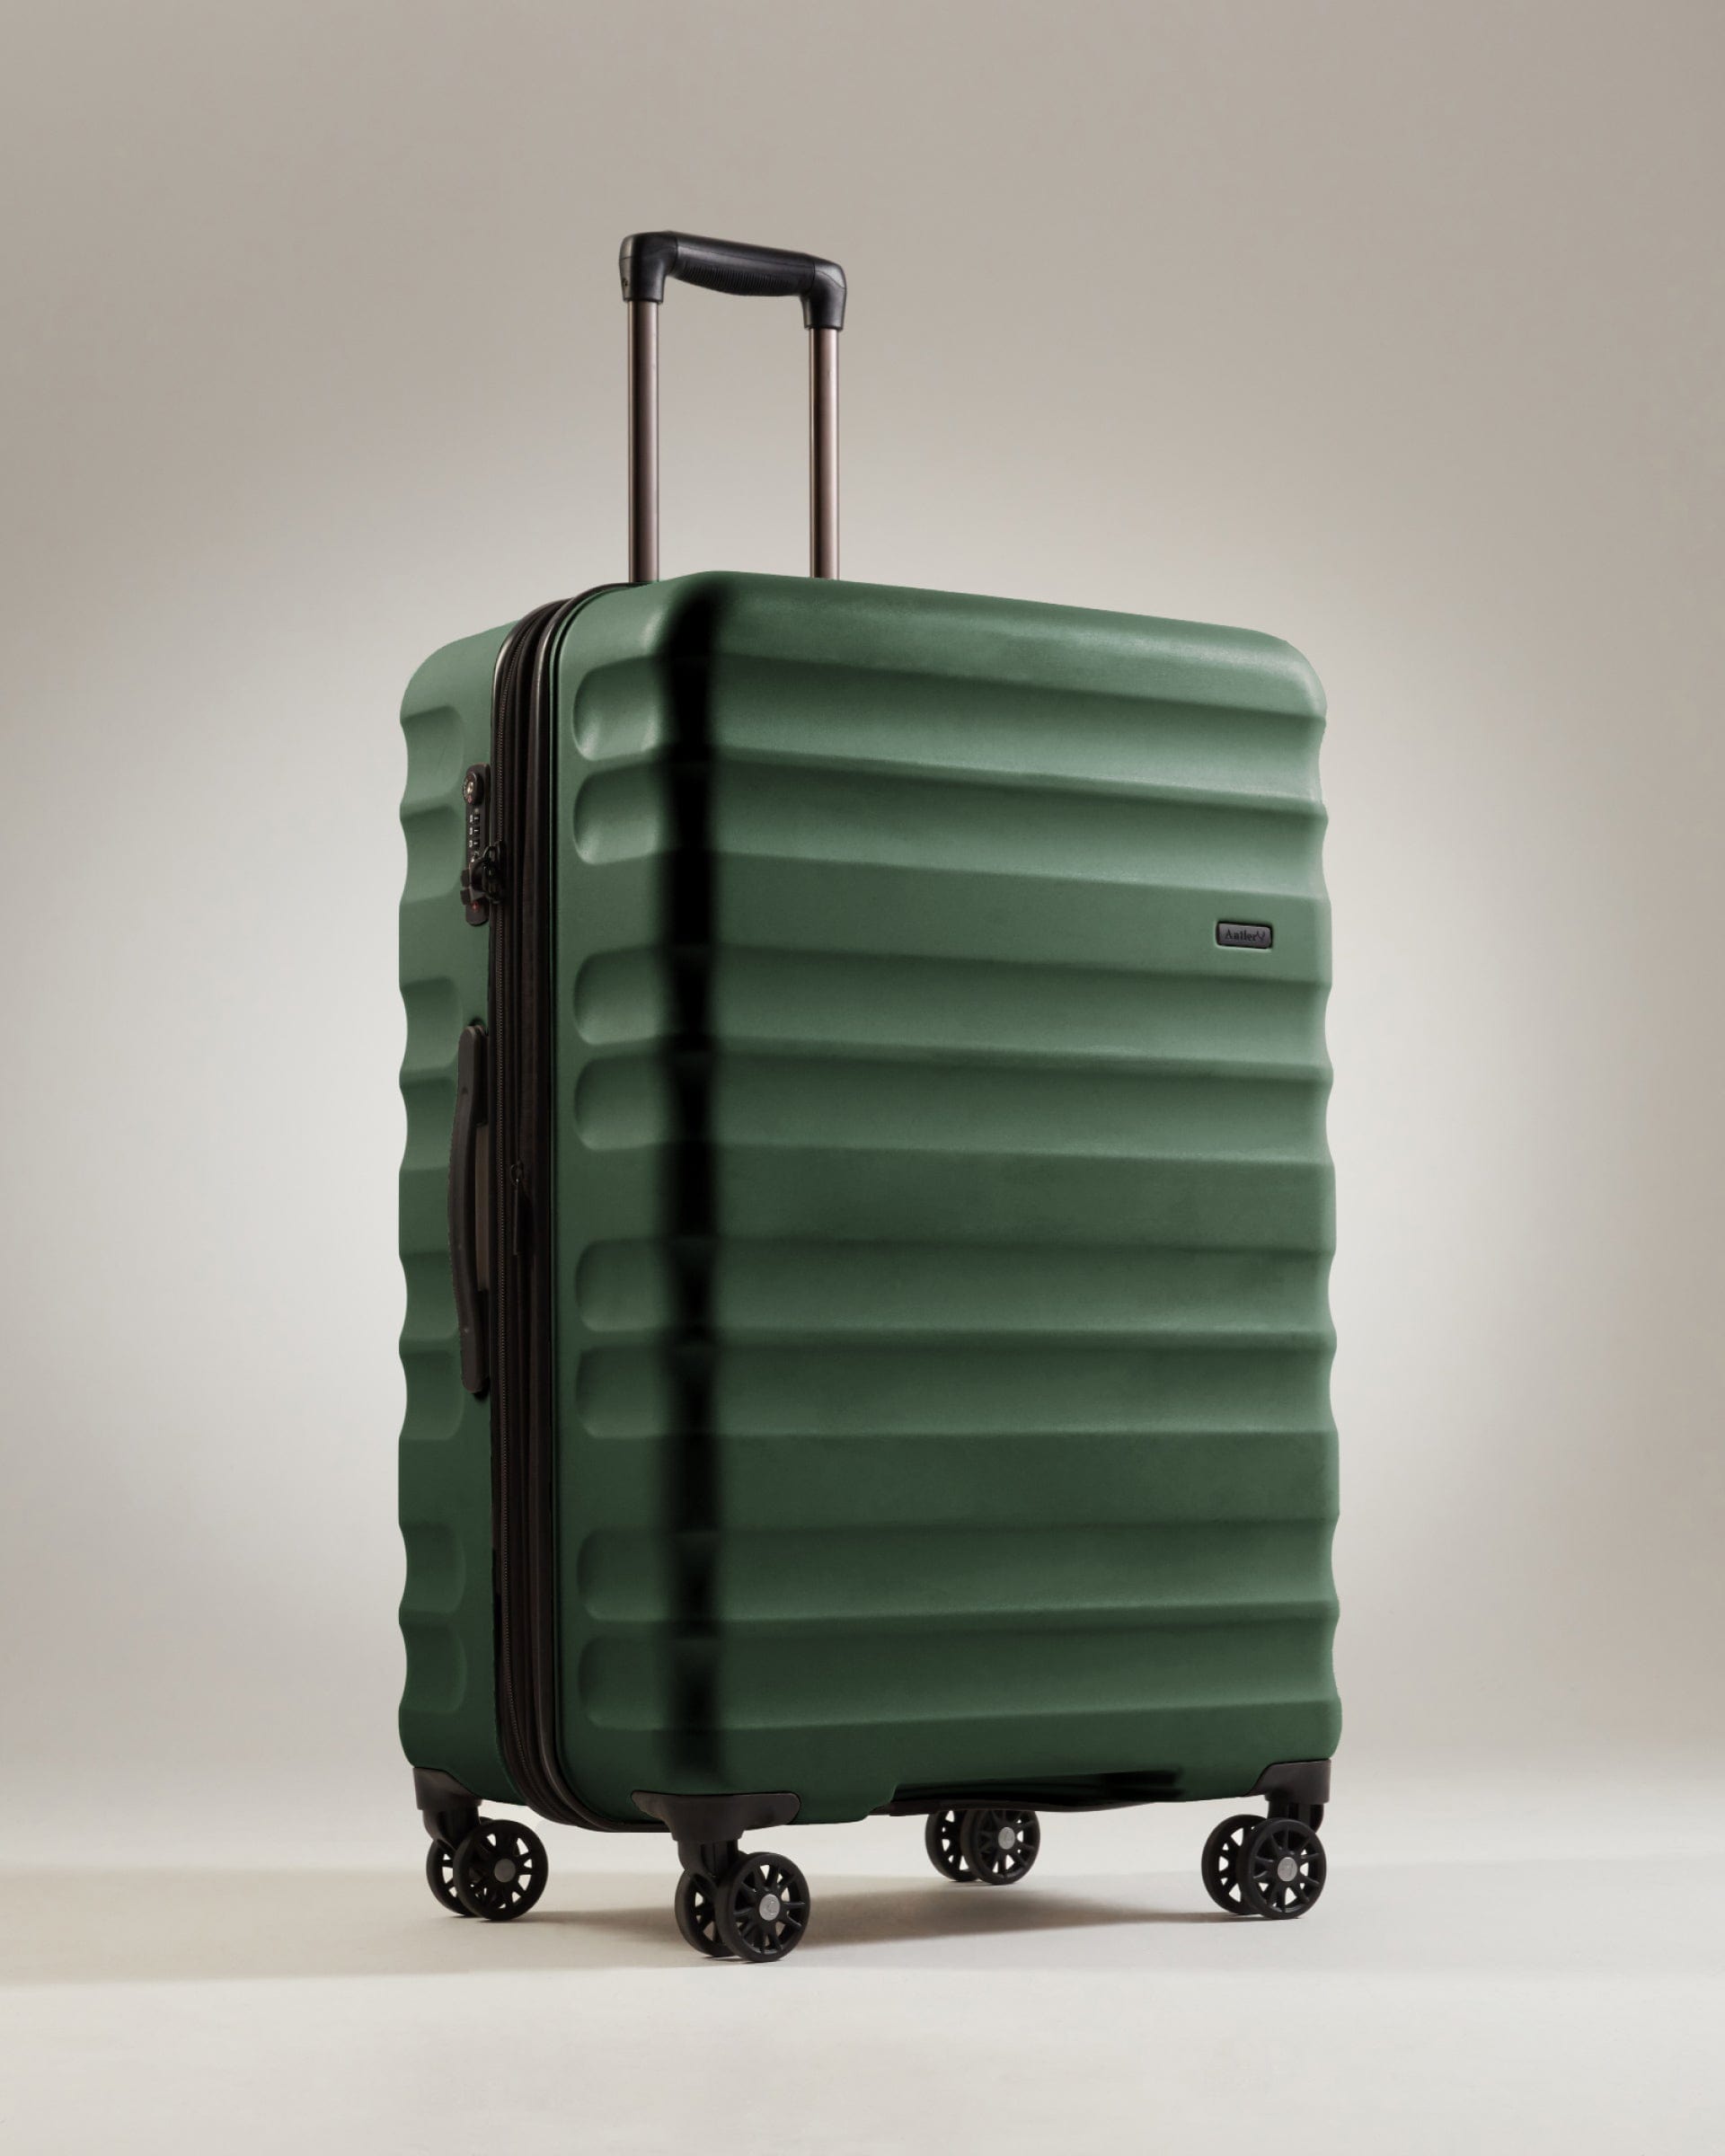 View Antler Clifton Large Suitcase In Woodland Green Size 35 x 52 x 80 cm information